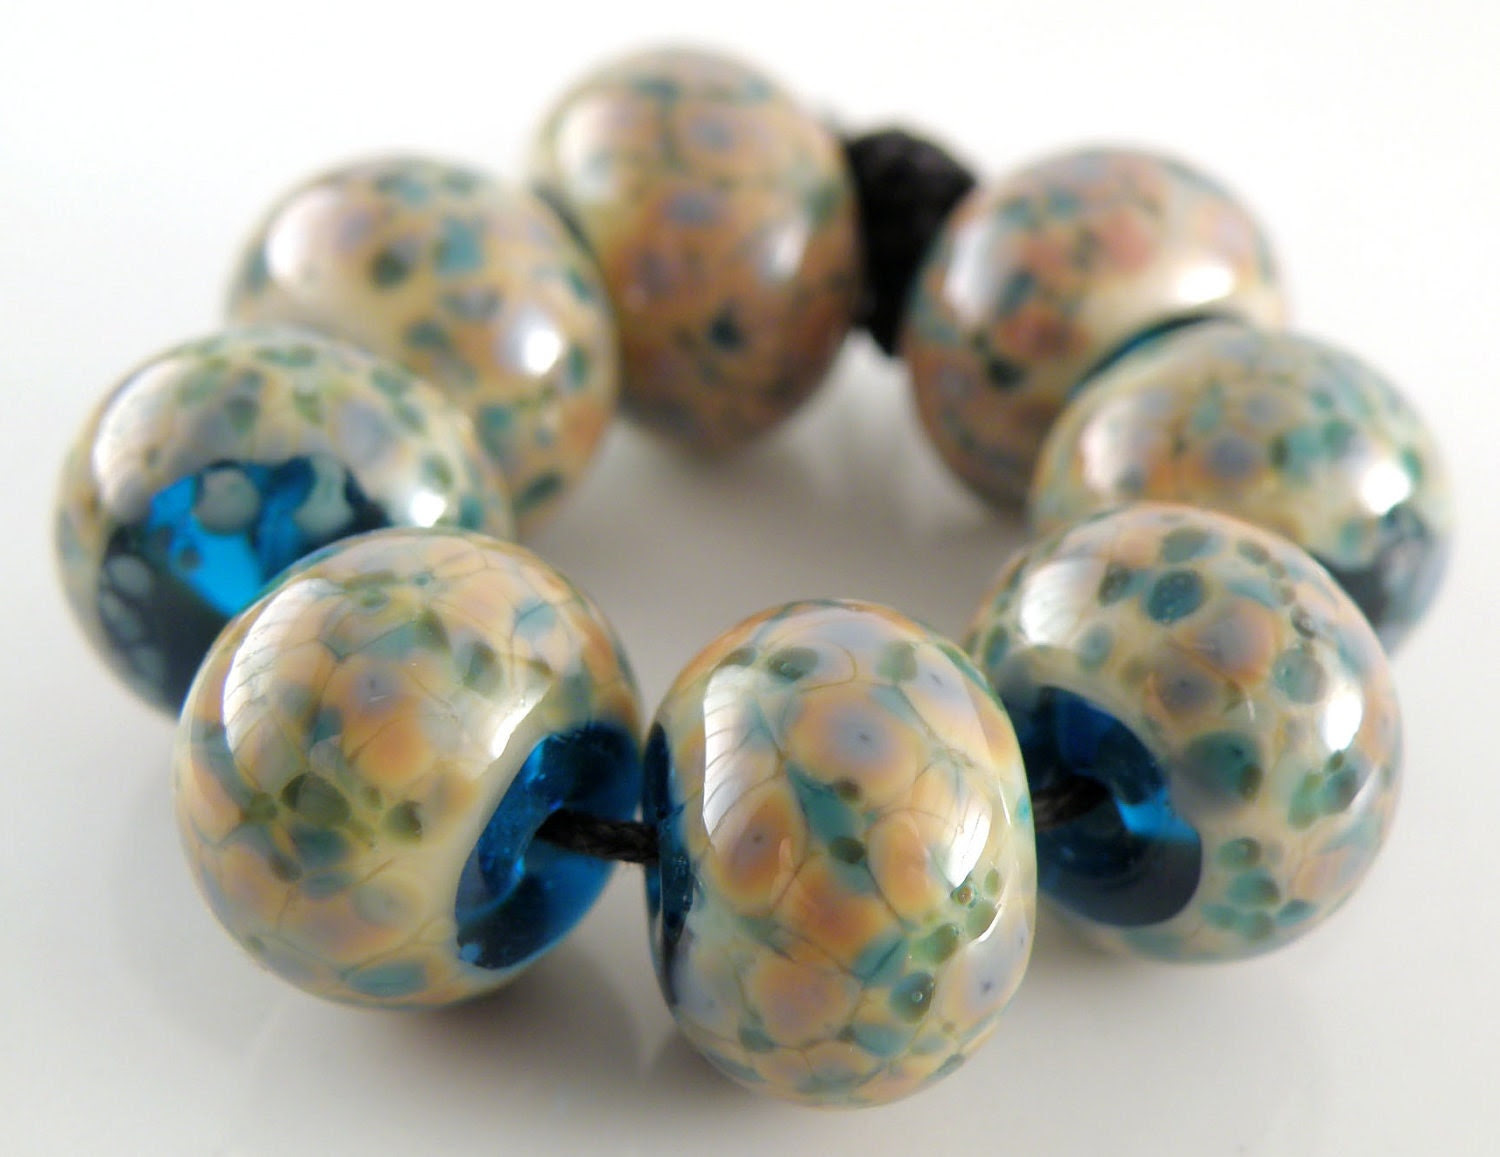 Beach Party - Handmade Lampwork Beads Glass Rounds - Blues, Greens, Peach, Tropical - SRA (Set of 8 Beads) - ahouston